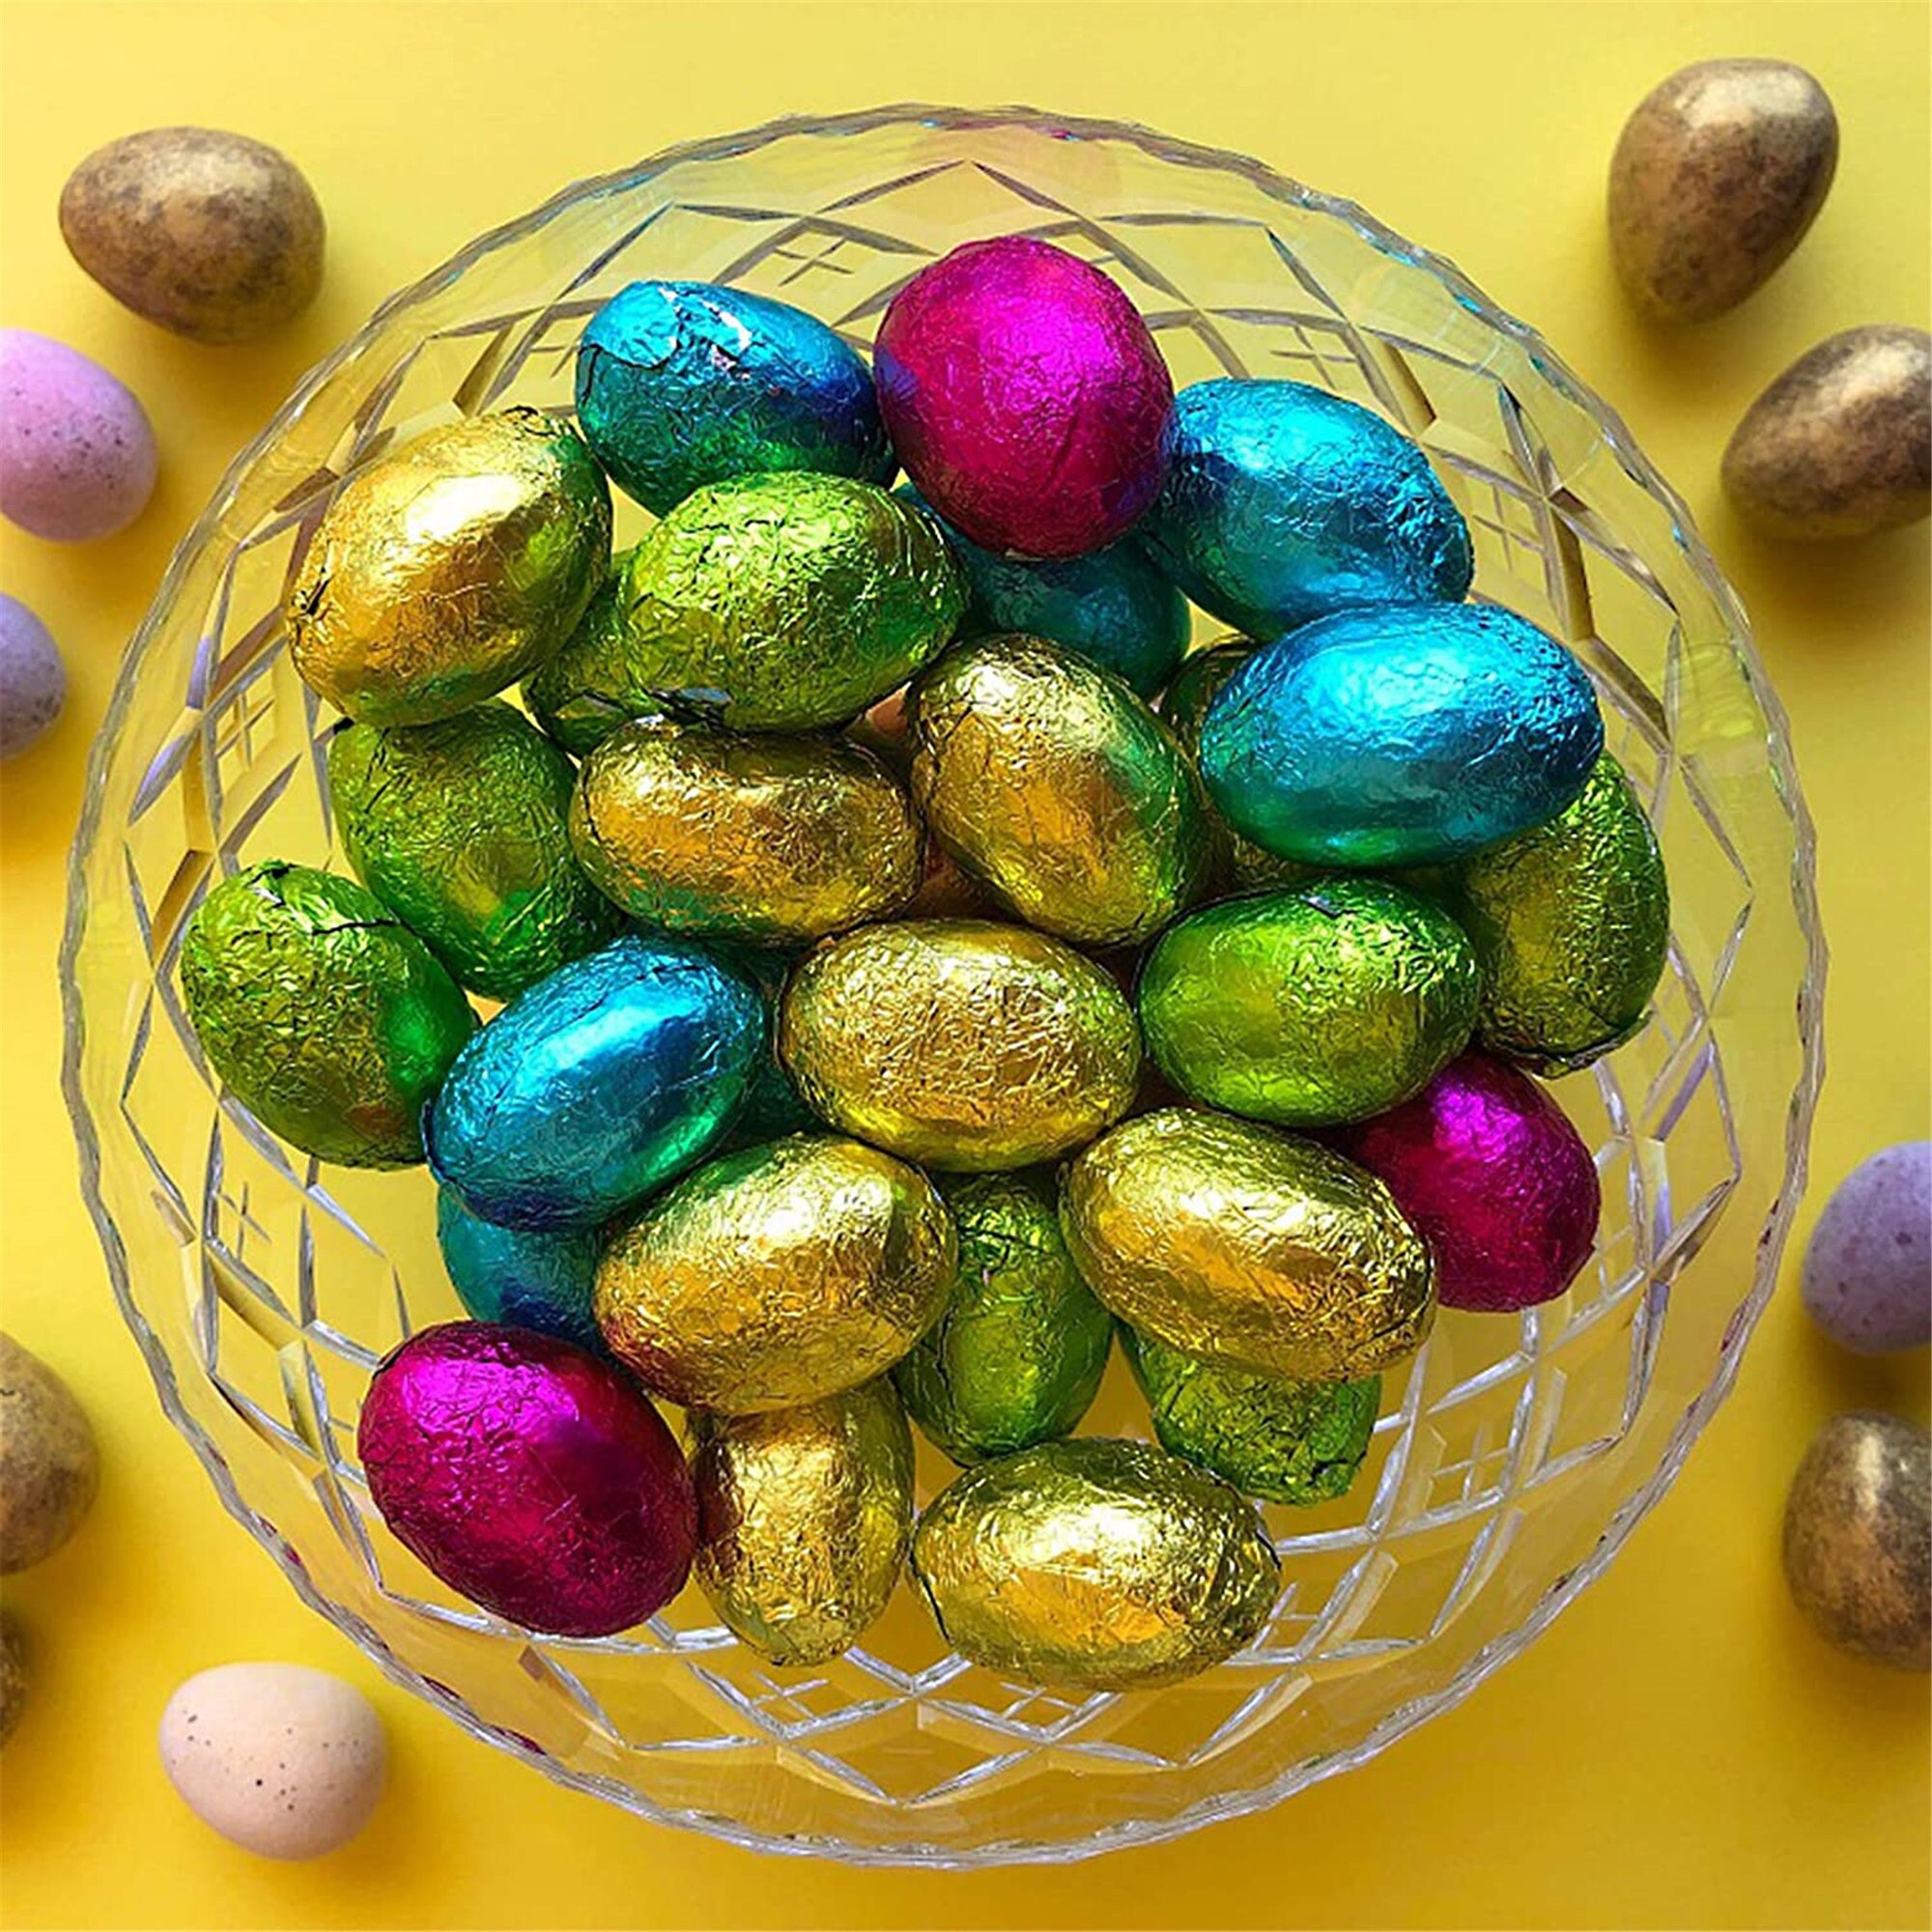 Easter Egg Shaped Silicone Chocolate Candy Molds - Brilliant Promos - Be  Brilliant!